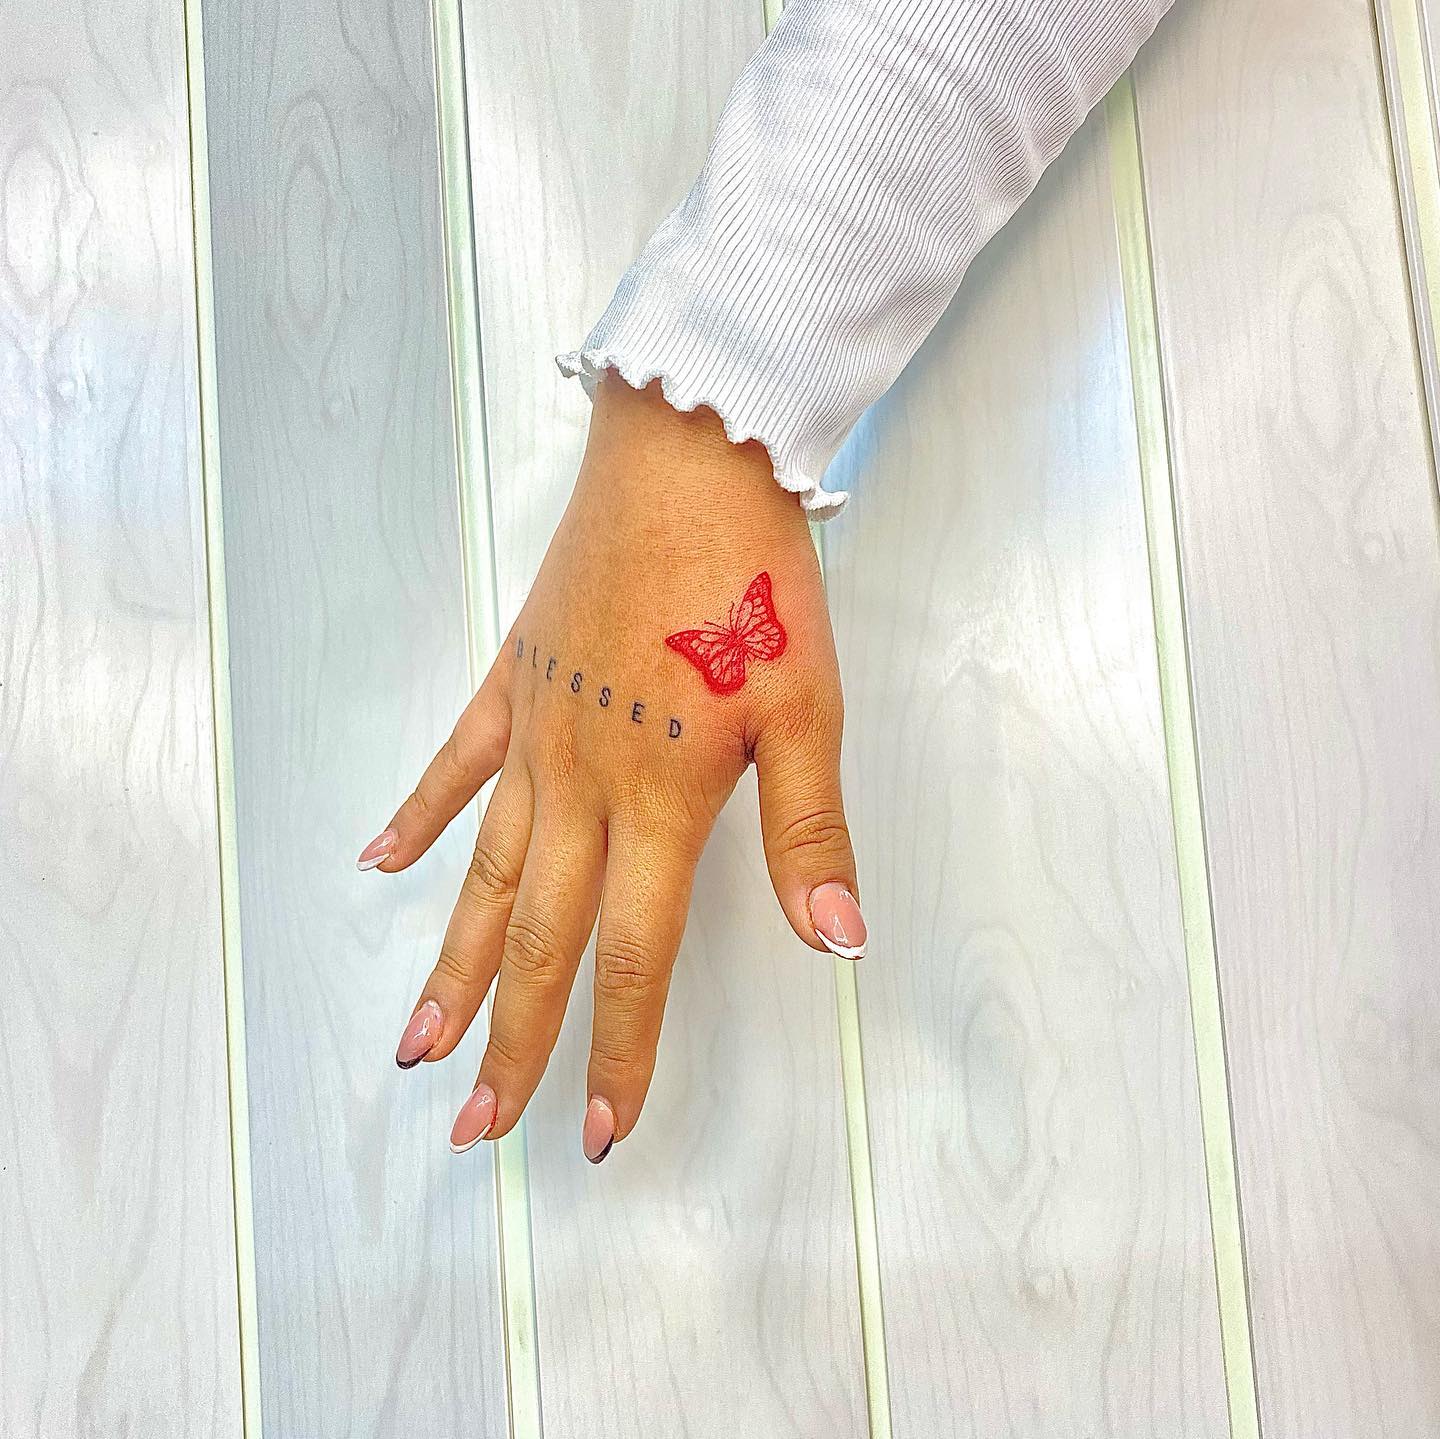 Small red butterfly tattoo on hand